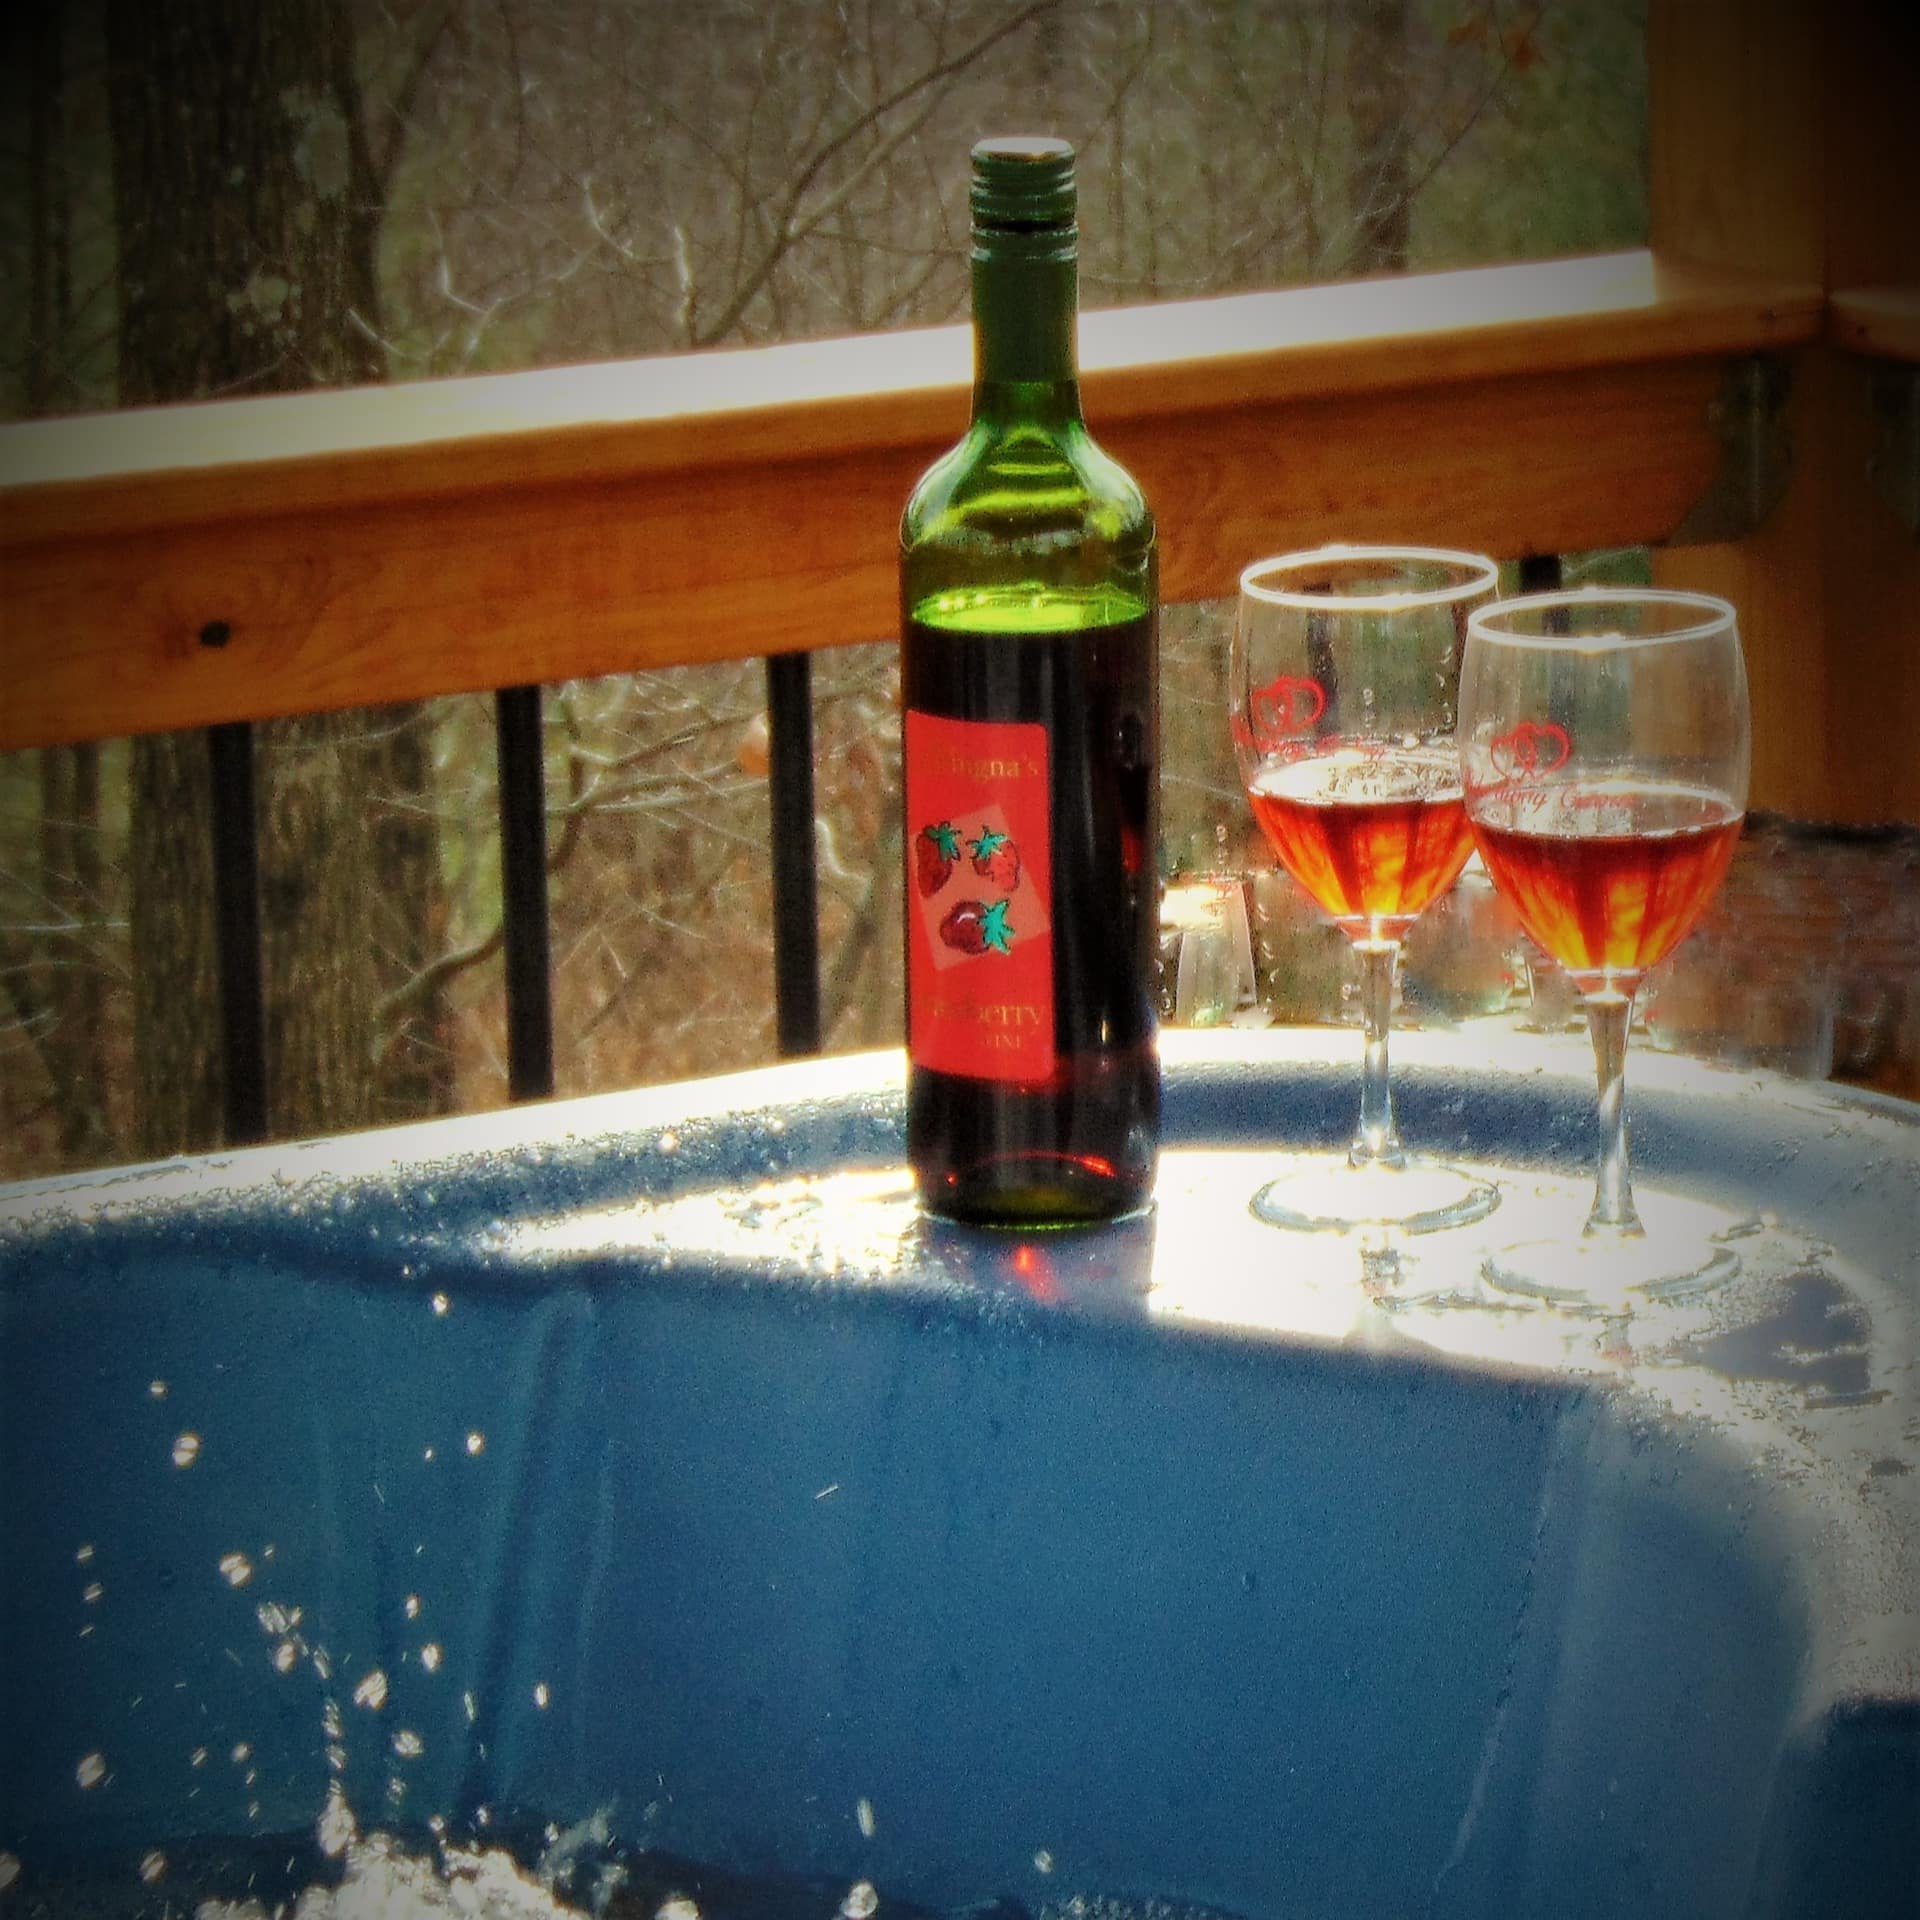 A bottle of wine and 2 glasses by a hot tub on a cabin's deck